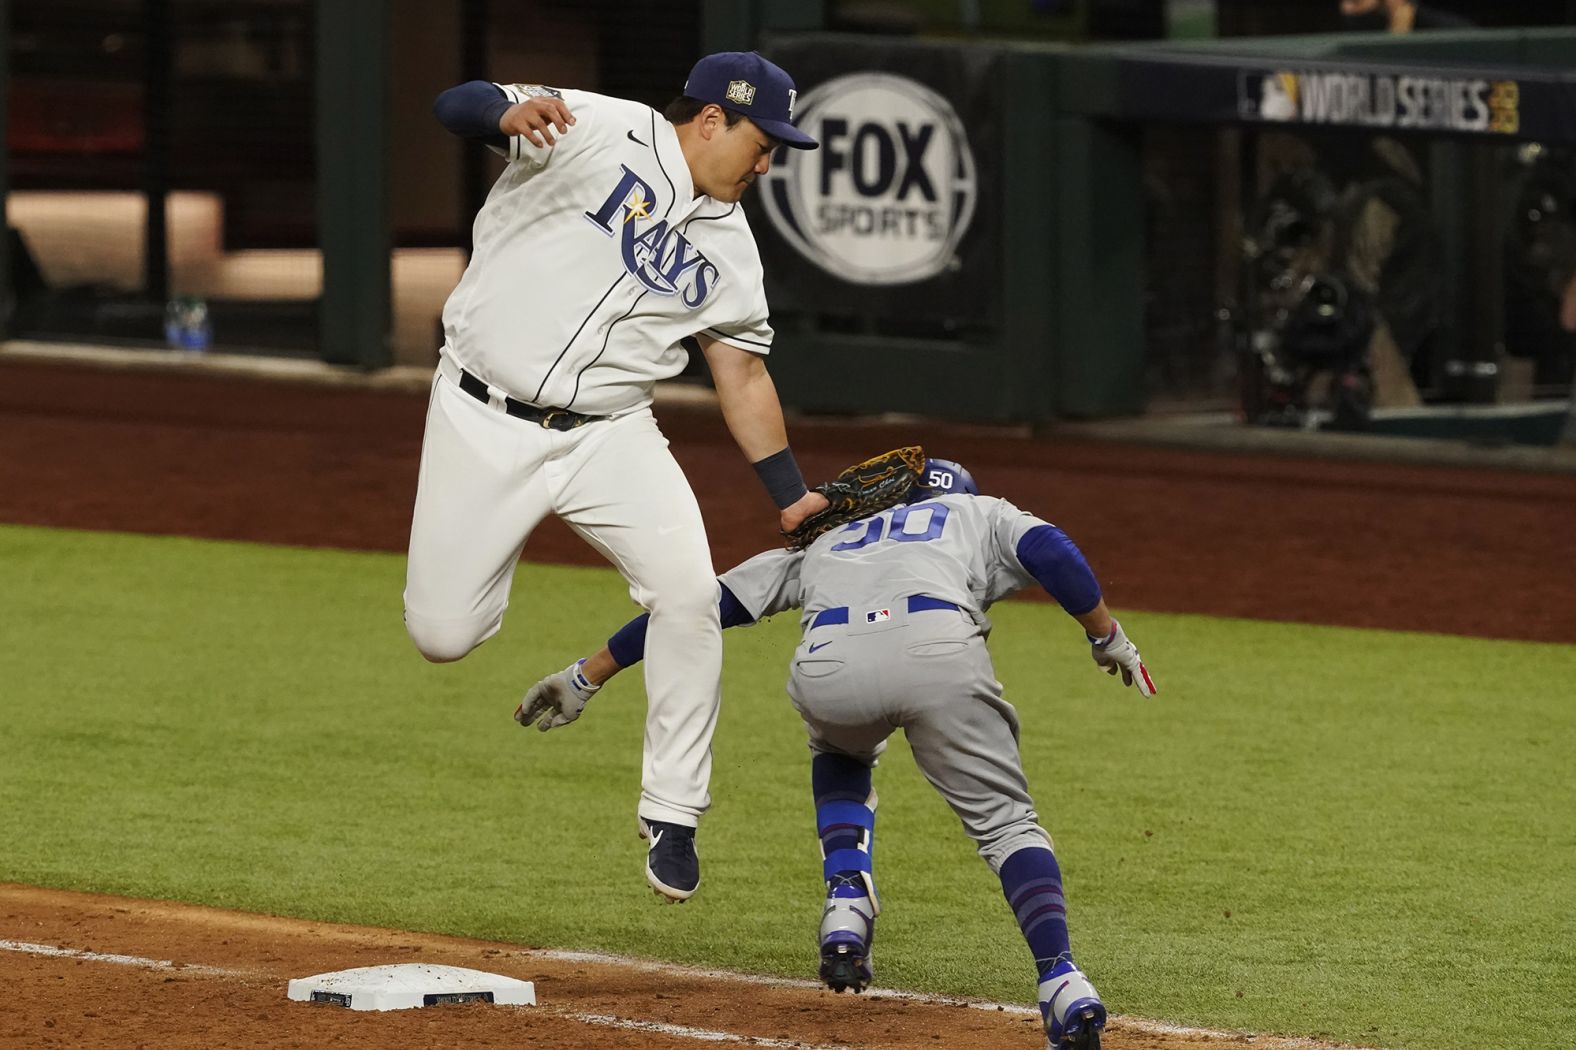 The Dodgers beat the Rays 6-2 in Game 3 on Friday, October 23, taking a 2-1 series lead. Here, Rays' first baseman Ji-Man Choi tags out Mookie Betts at first base during the eighth inning.